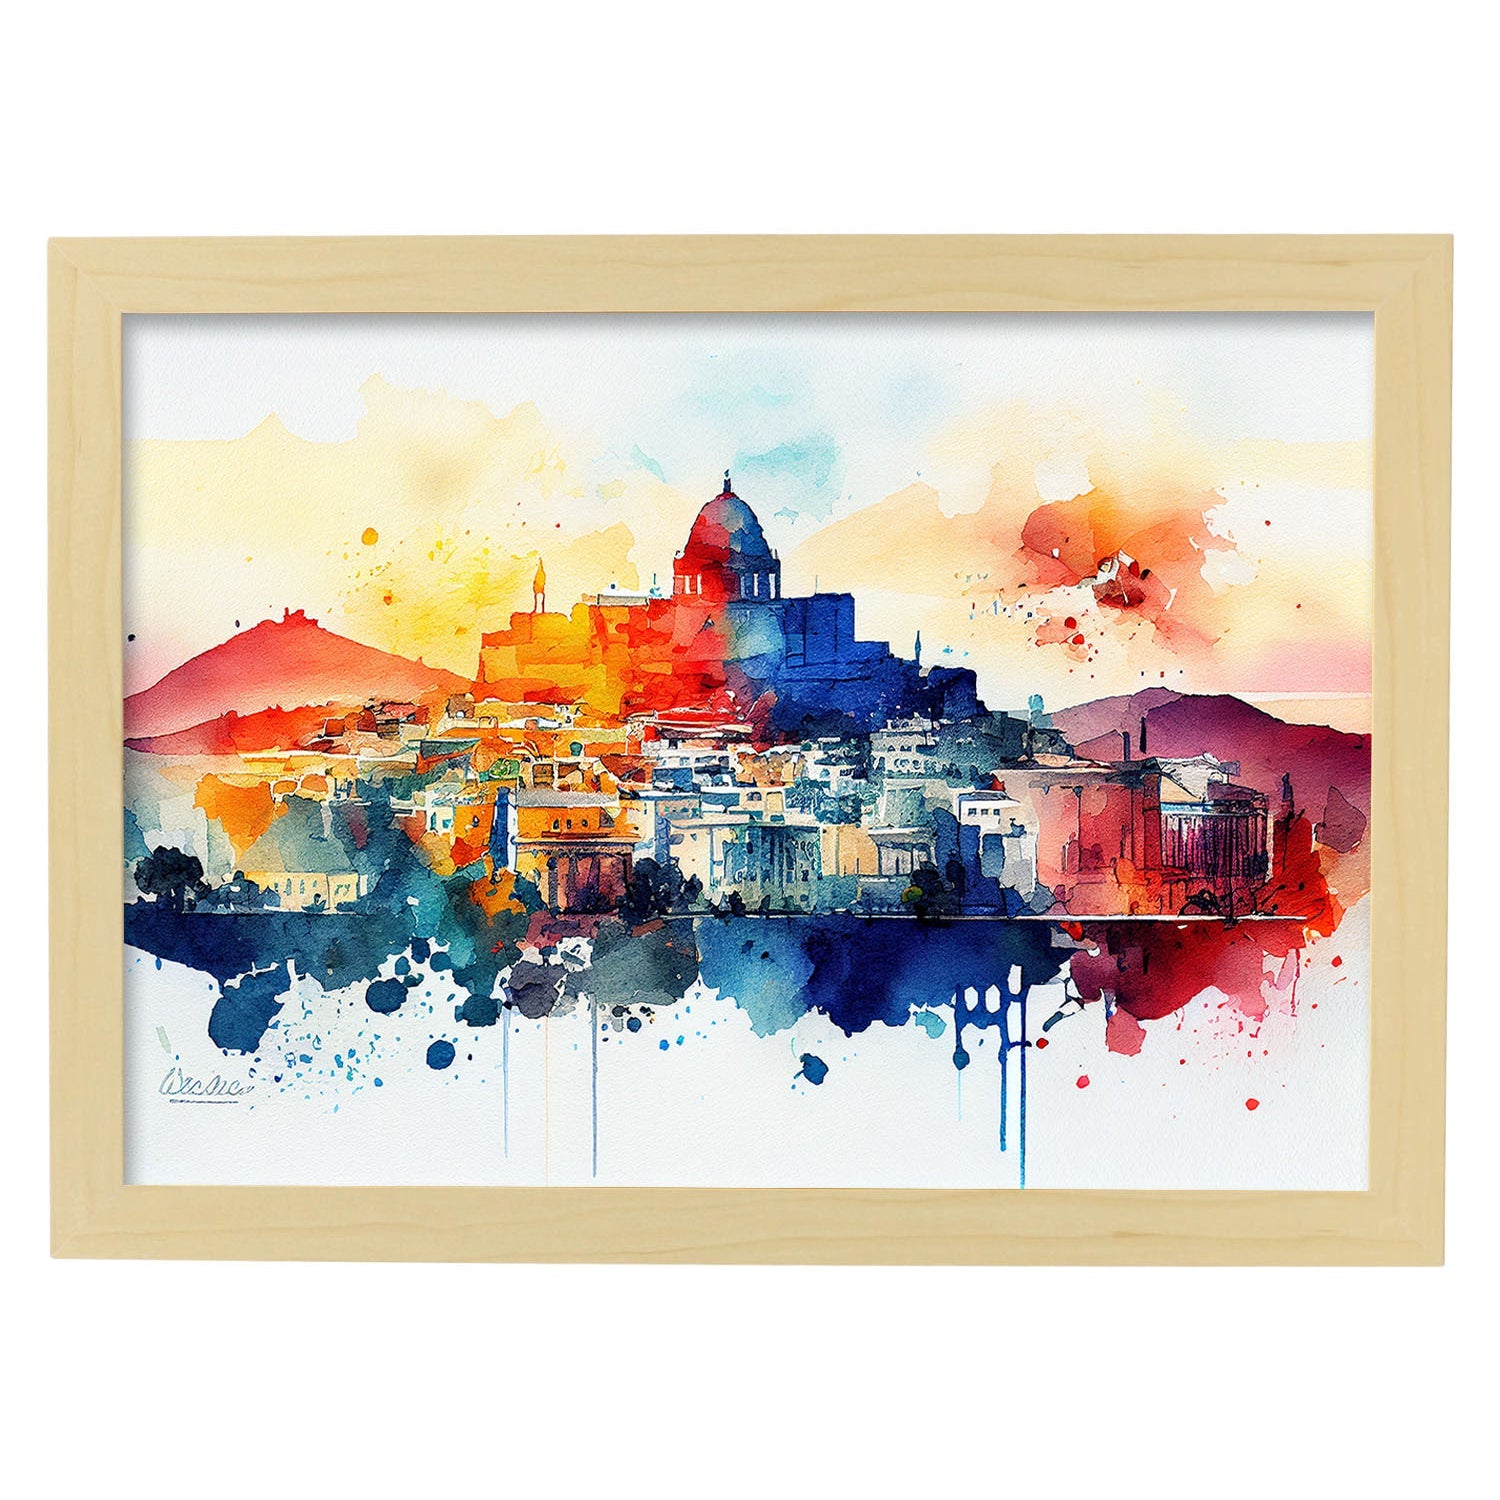 Nacnic watercolor of a skyline of the city of Athens. Aesthetic Wall Art Prints for Bedroom or Living Room Design.-Artwork-Nacnic-A4-Marco Madera Clara-Nacnic Estudio SL